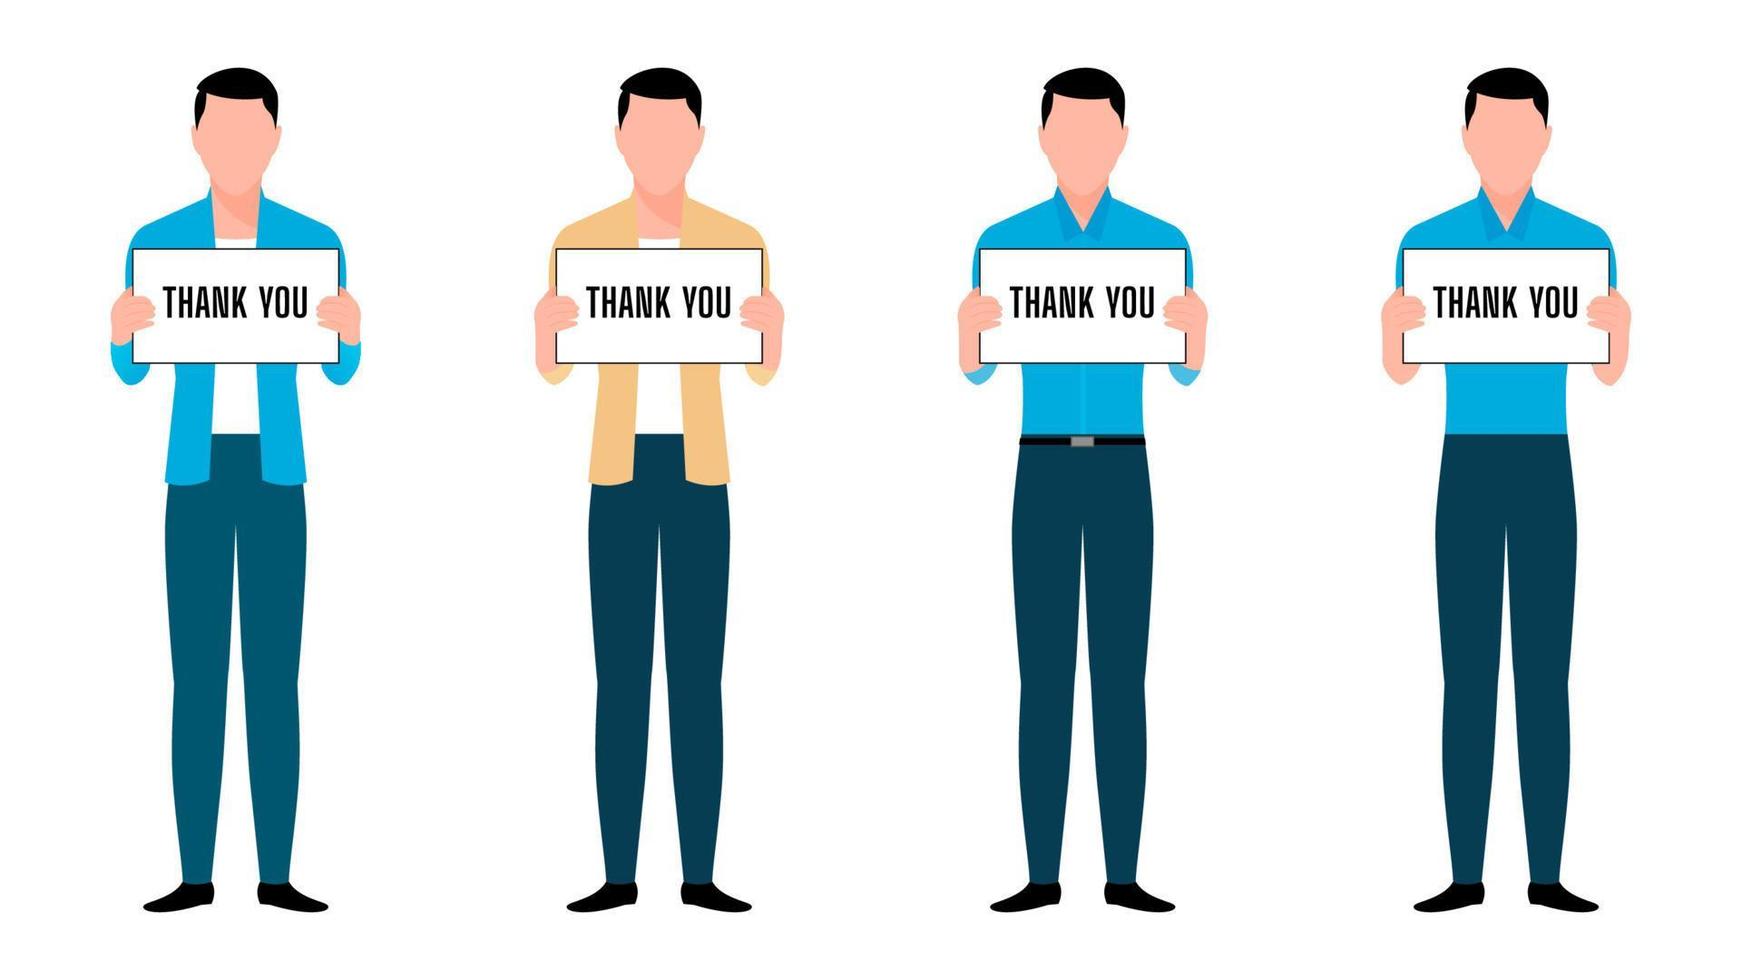 man holding thank you sign board flat character illustration, people holding board business character vector illustration on white background.